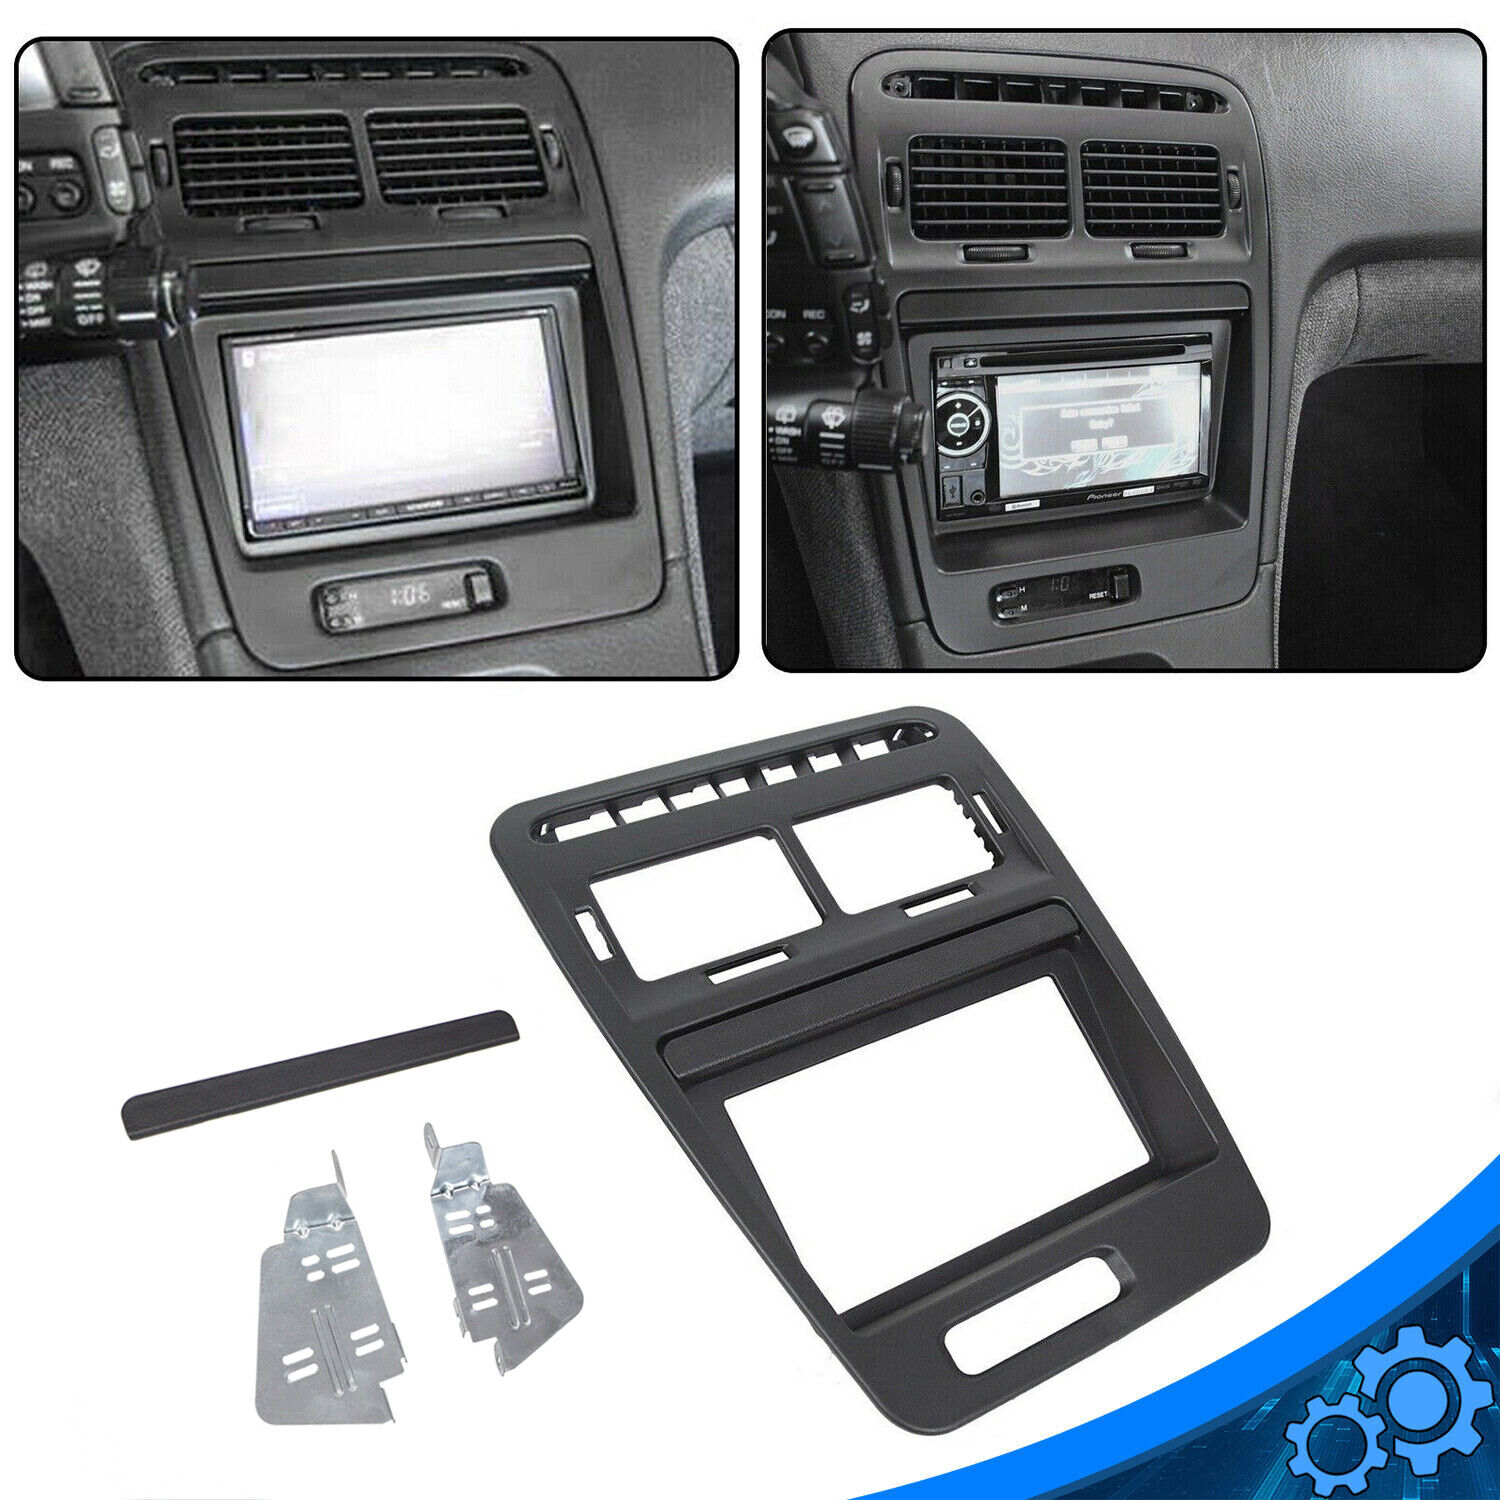 For Nissan 300ZX 1990-1999 Double Din Radio Dash Bezel Kit with Stock Finish